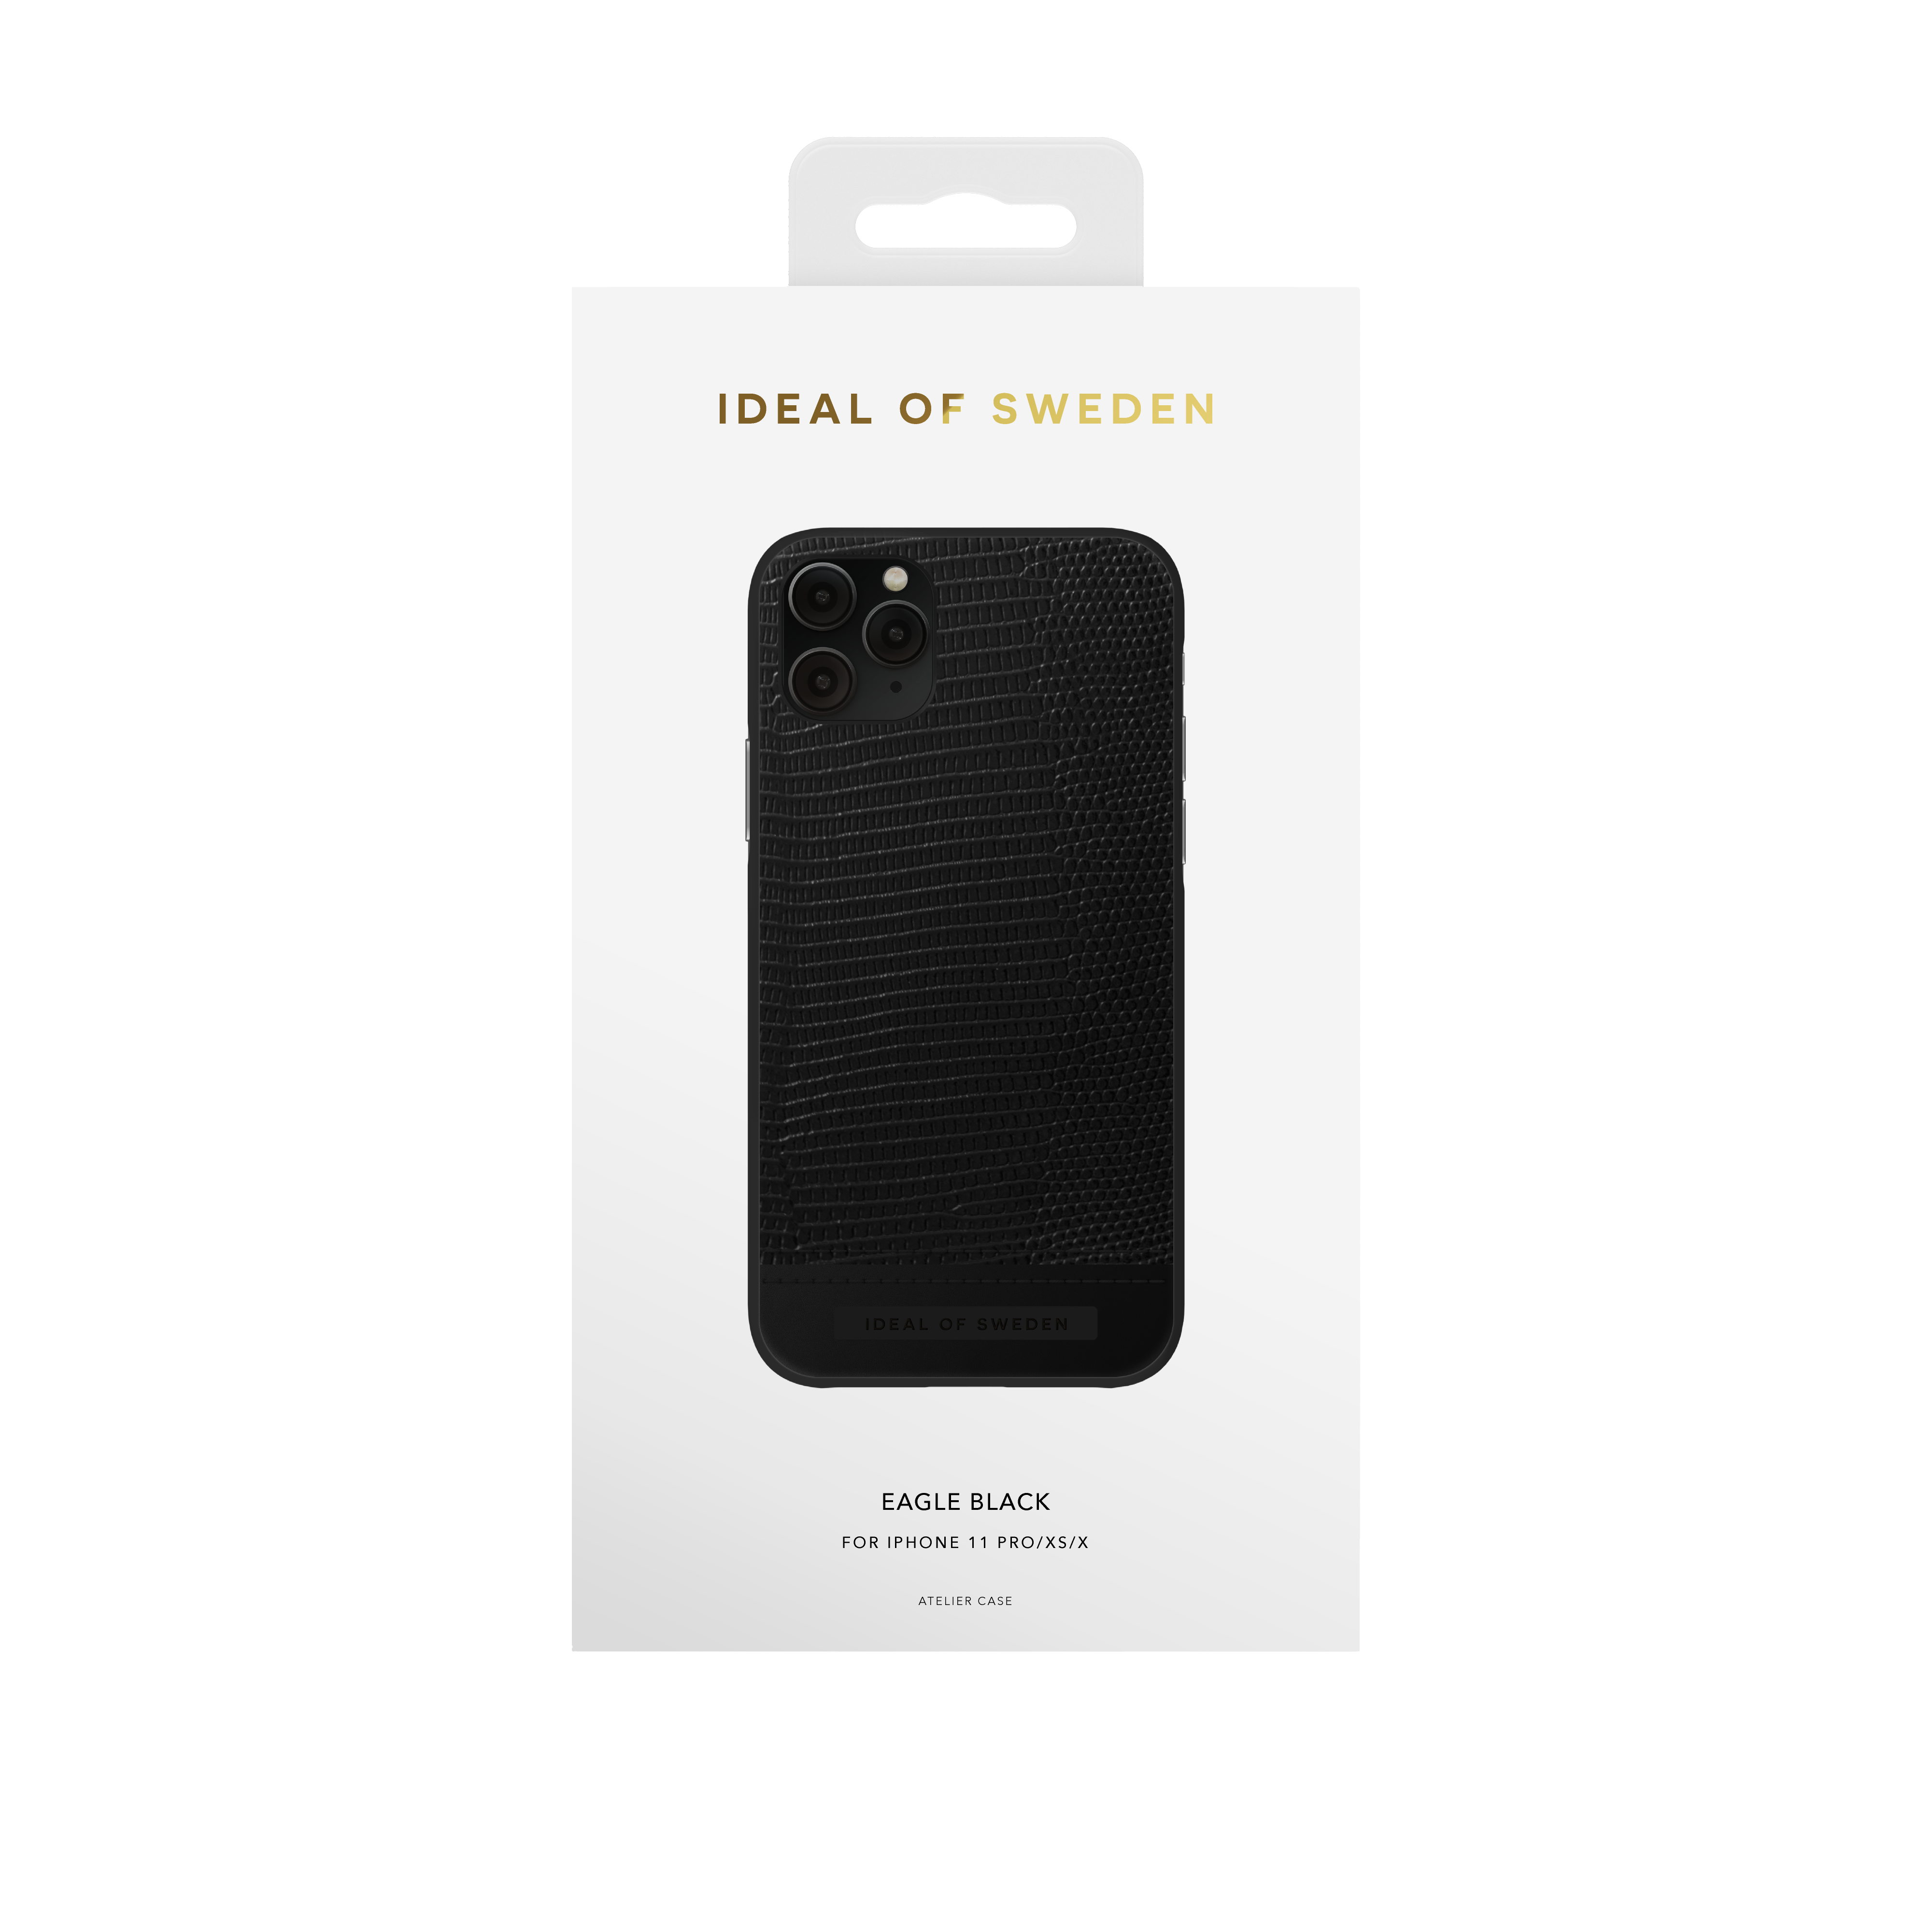 IDEAL OF SWEDEN IDACAW20-1958-229, Backcover, Pro, XS, X, Eagle iPhone Apple, 11 iPhone Black iPhone